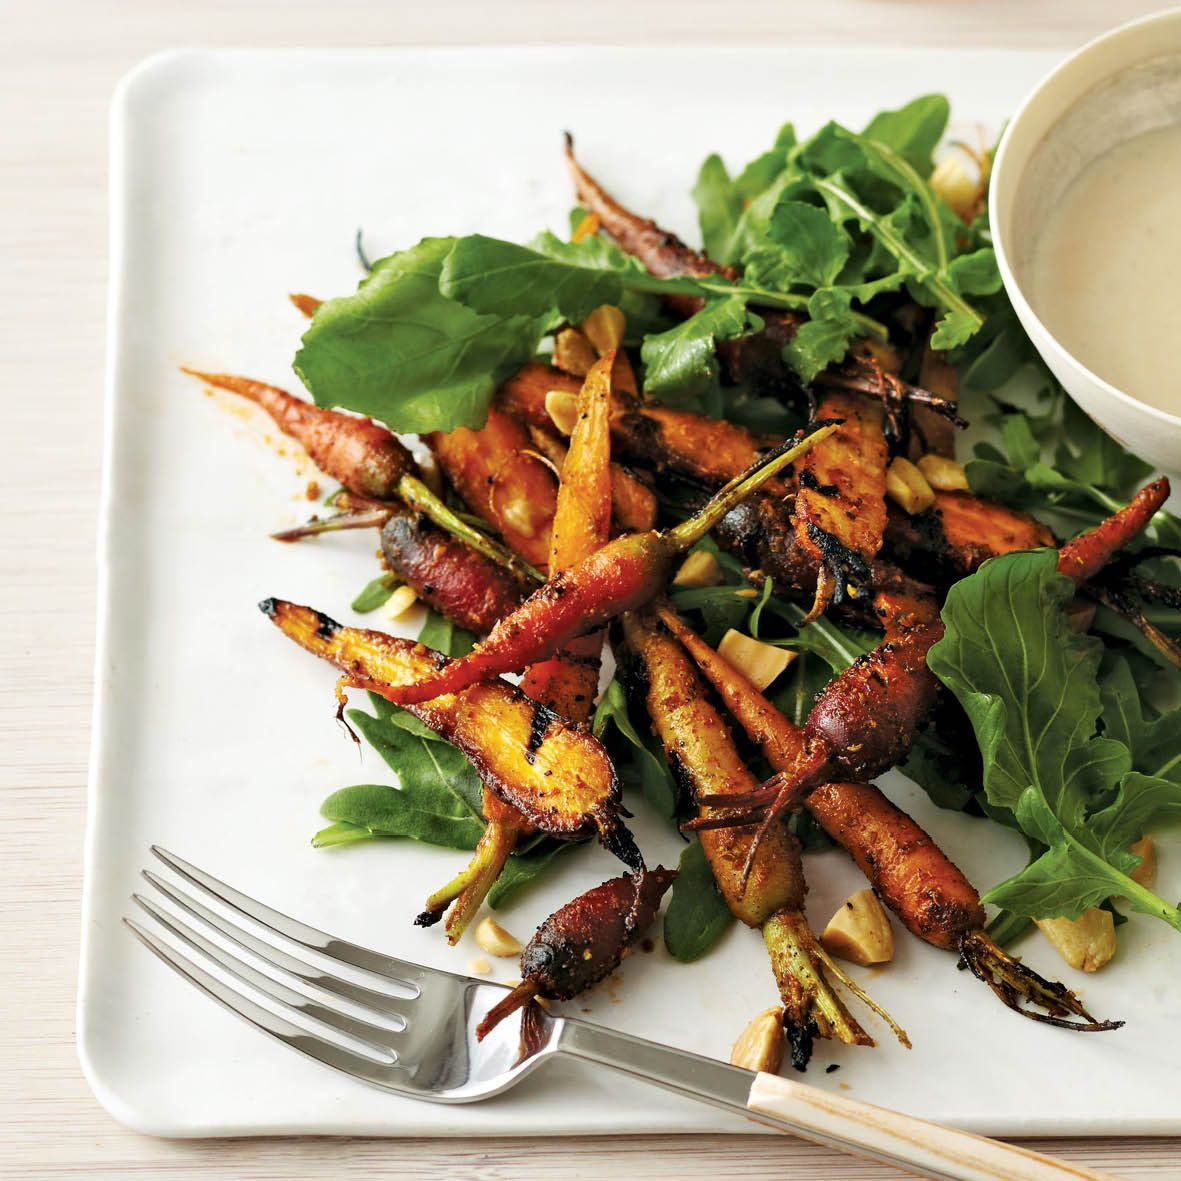 Grilled Carrot Salad with Brown Butter Vinaigrette.jpg